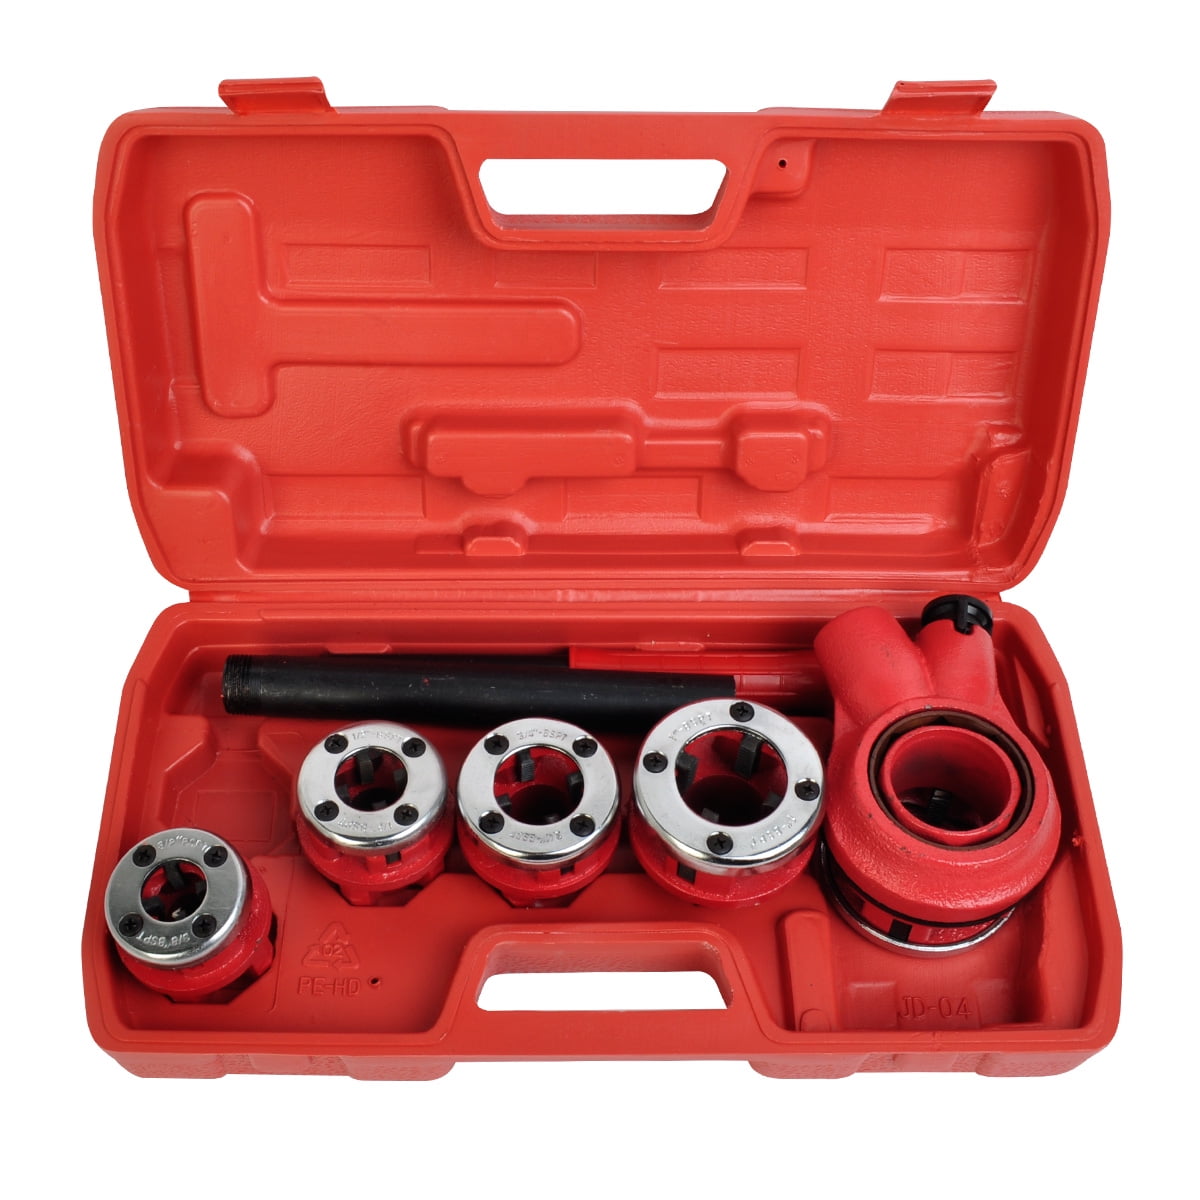 New Ratchet Pipe Threader Kit Set Ratcheting w/5 Dies and Case 